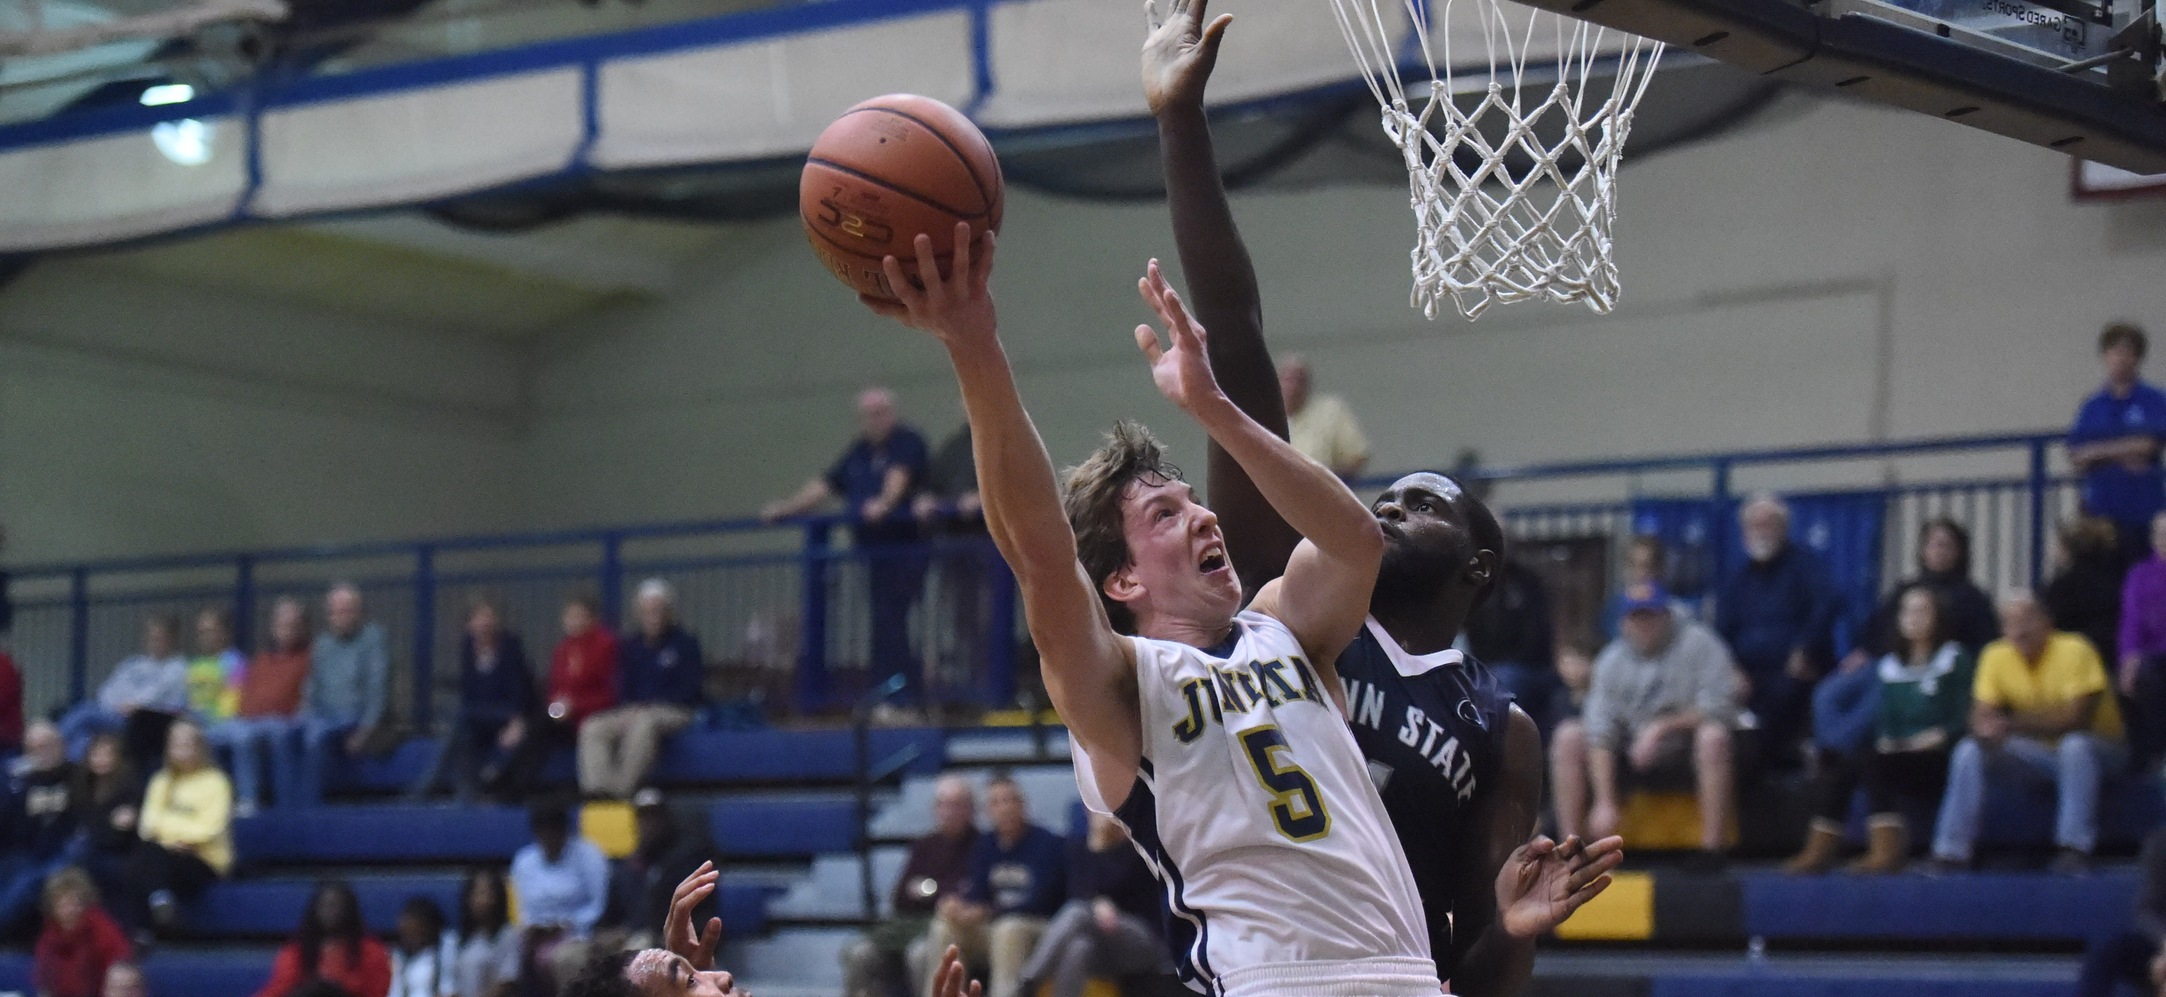 Seth Brewer finishes through contact against Penn State Abington in the Juniata Holiday Tournament.